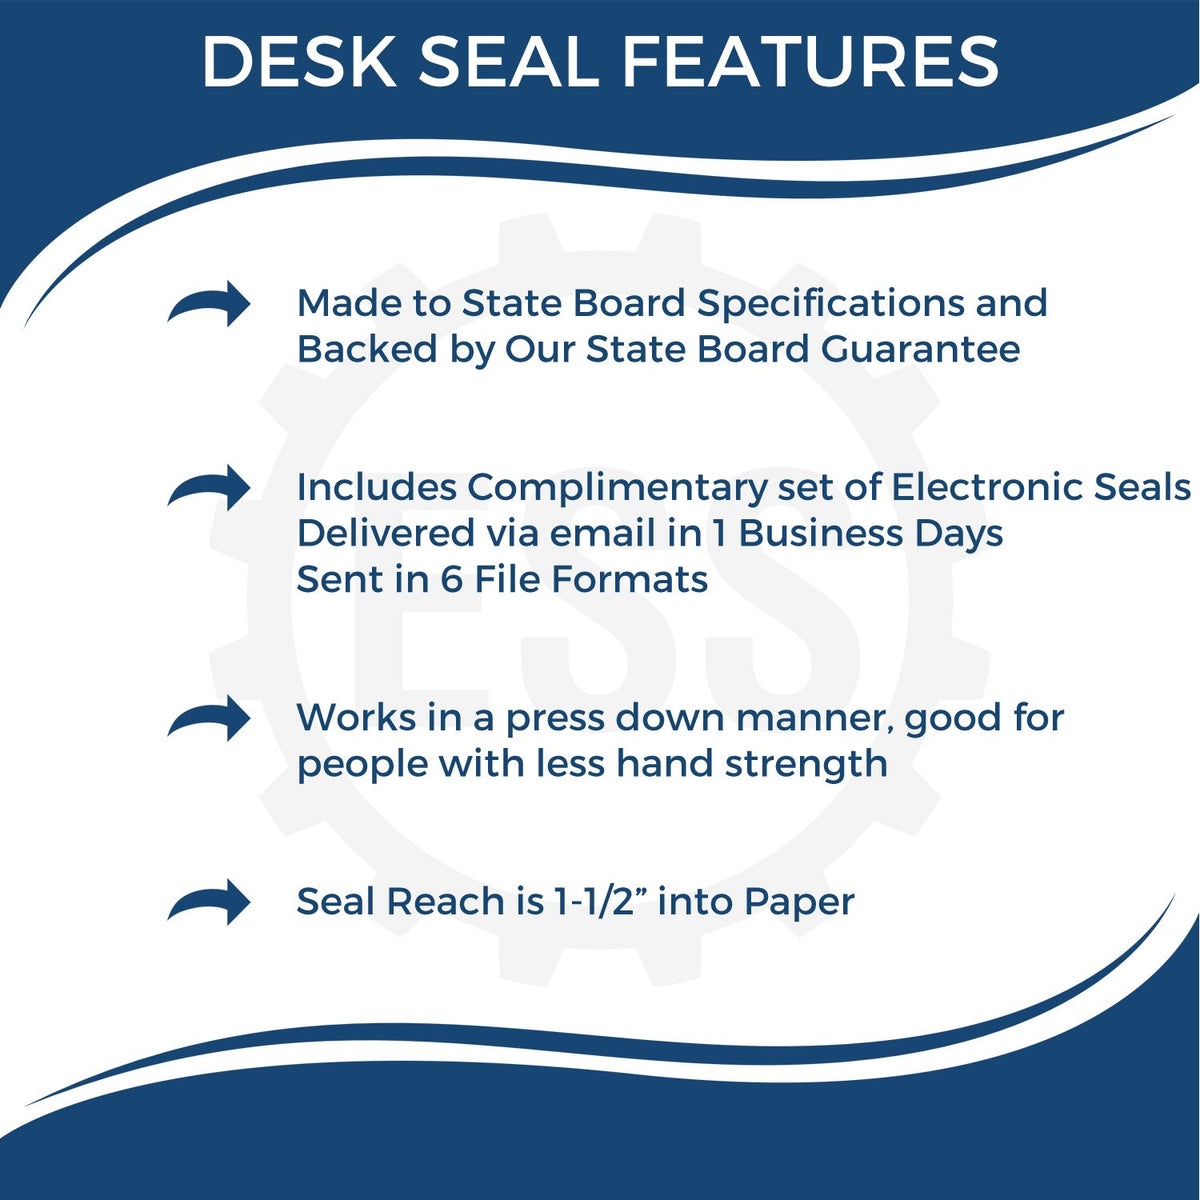 A picture of an infographic highlighting the selling points for the Michigan Geologist Desk Seal